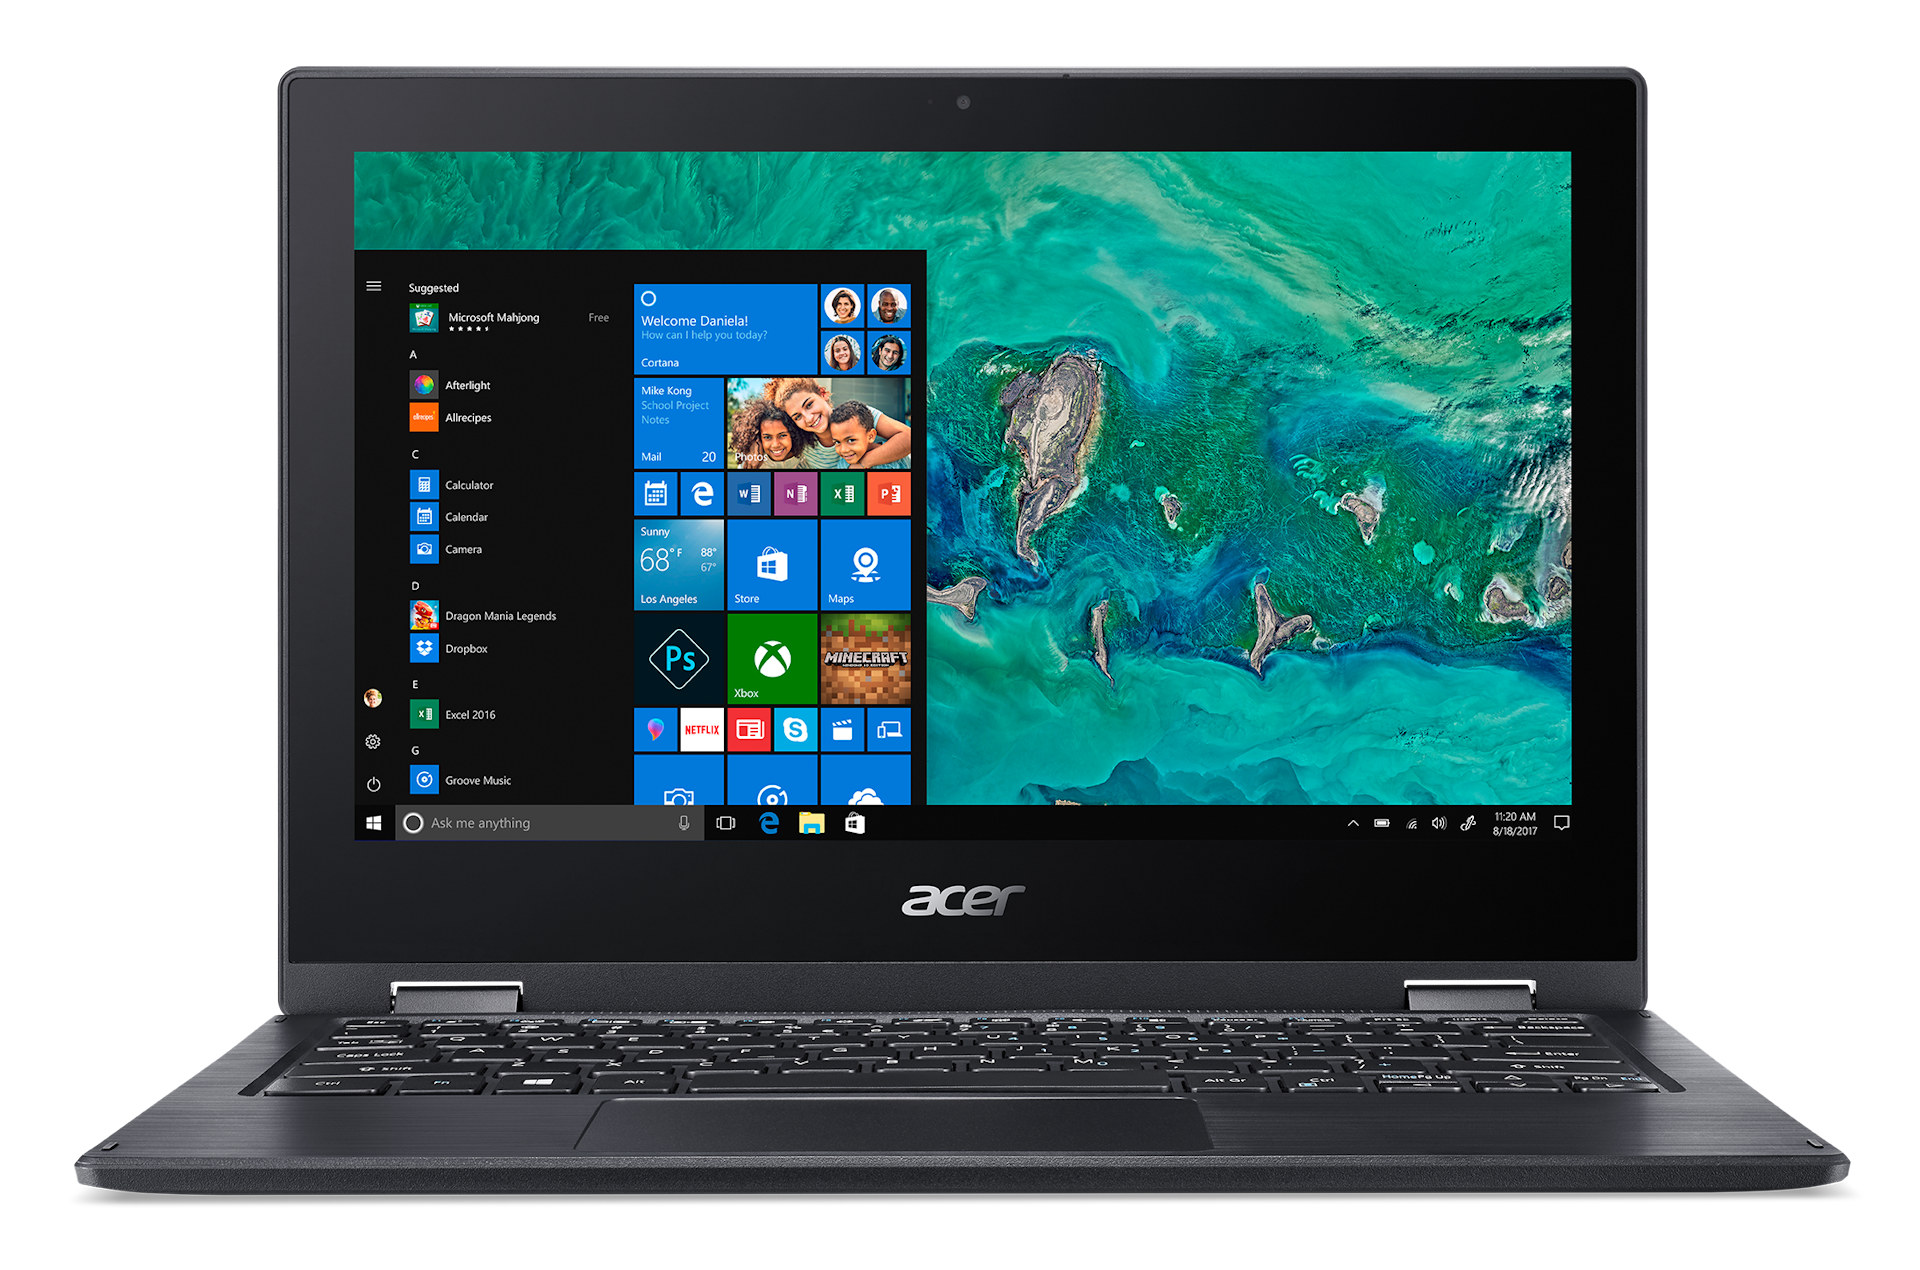 Touchscreen 11.6" Acer Spin 1 2-in-1 Laptop with Intel Pentium N5000, 4GB LPDDR4 Memory, 64GB